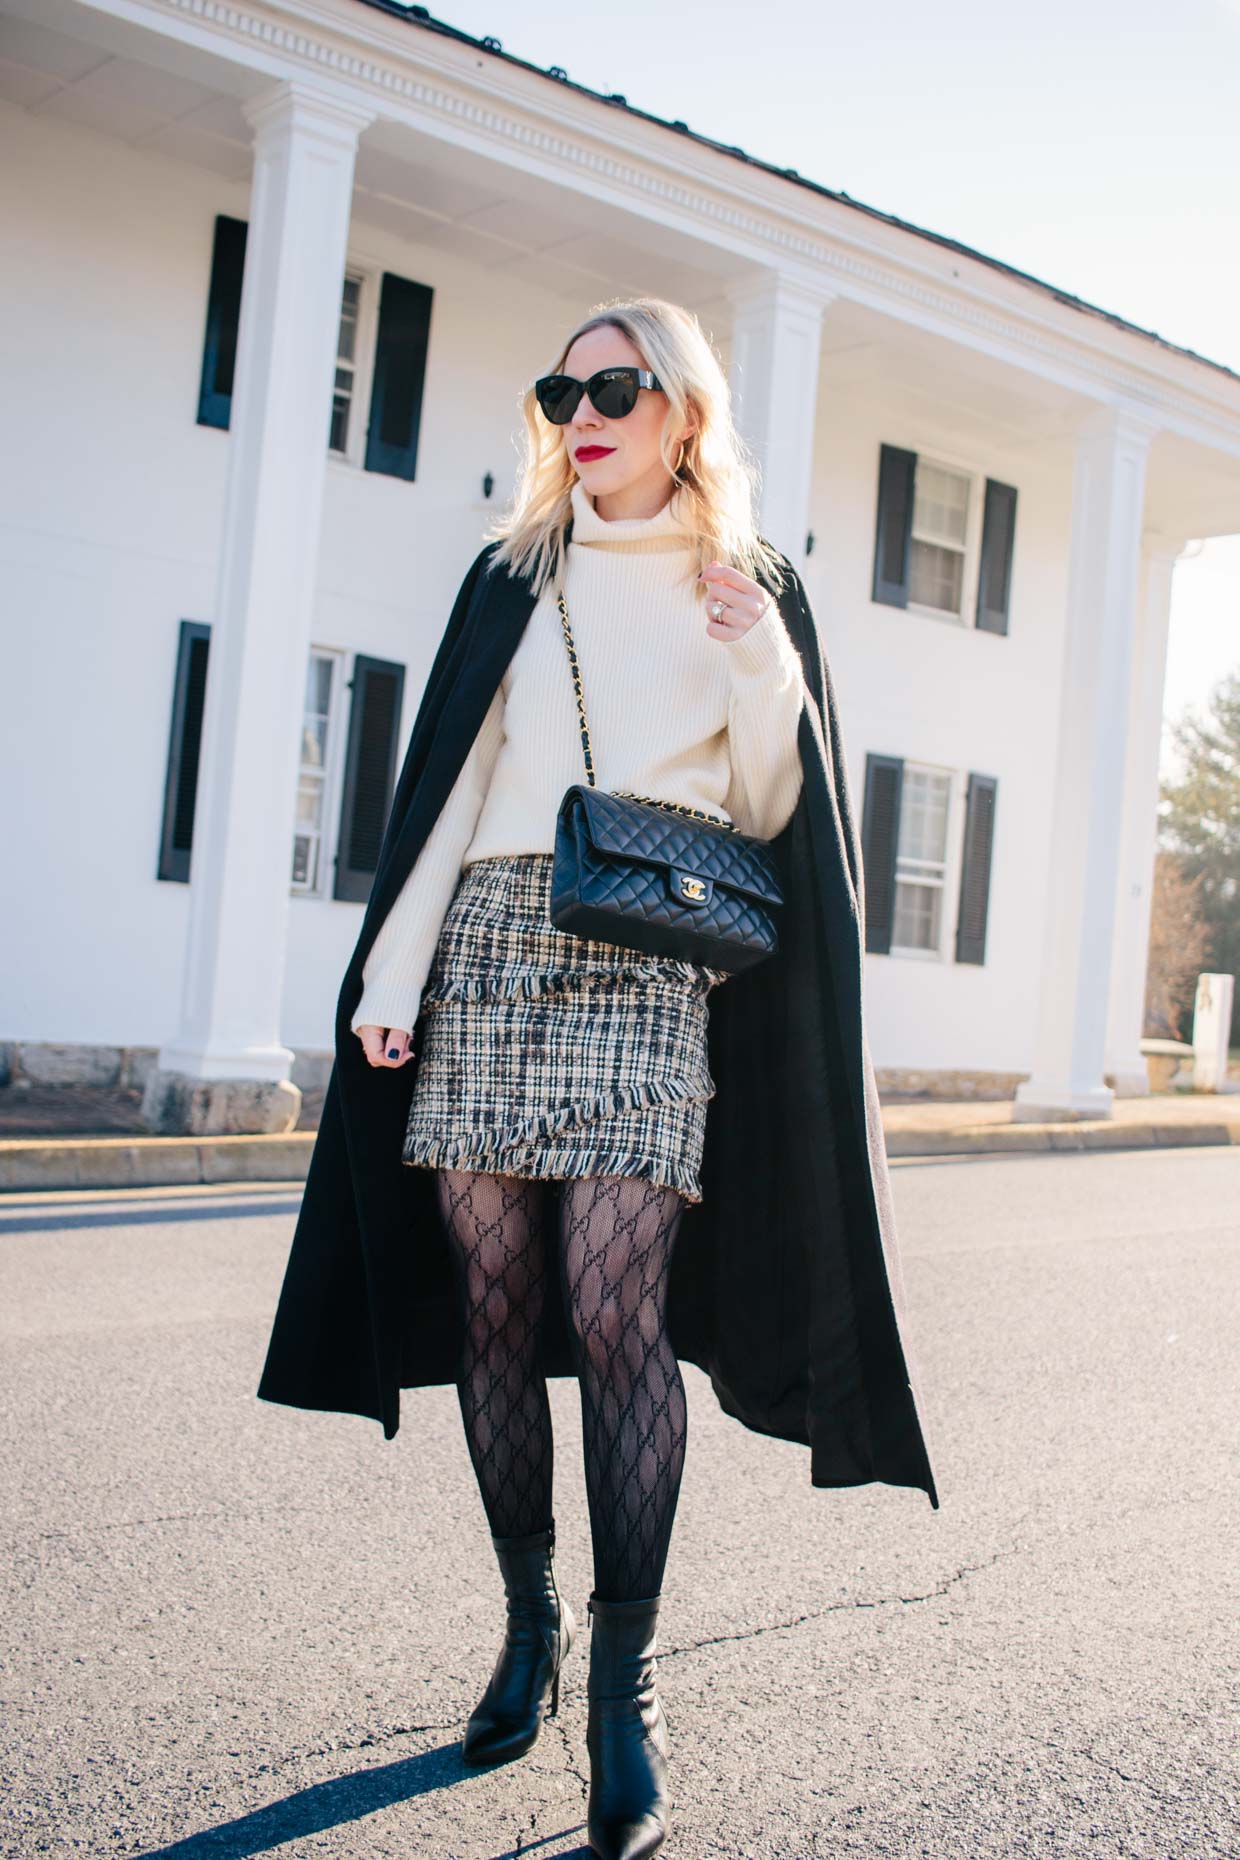 Stylish Gucci Patterned Tights for Winter Chic